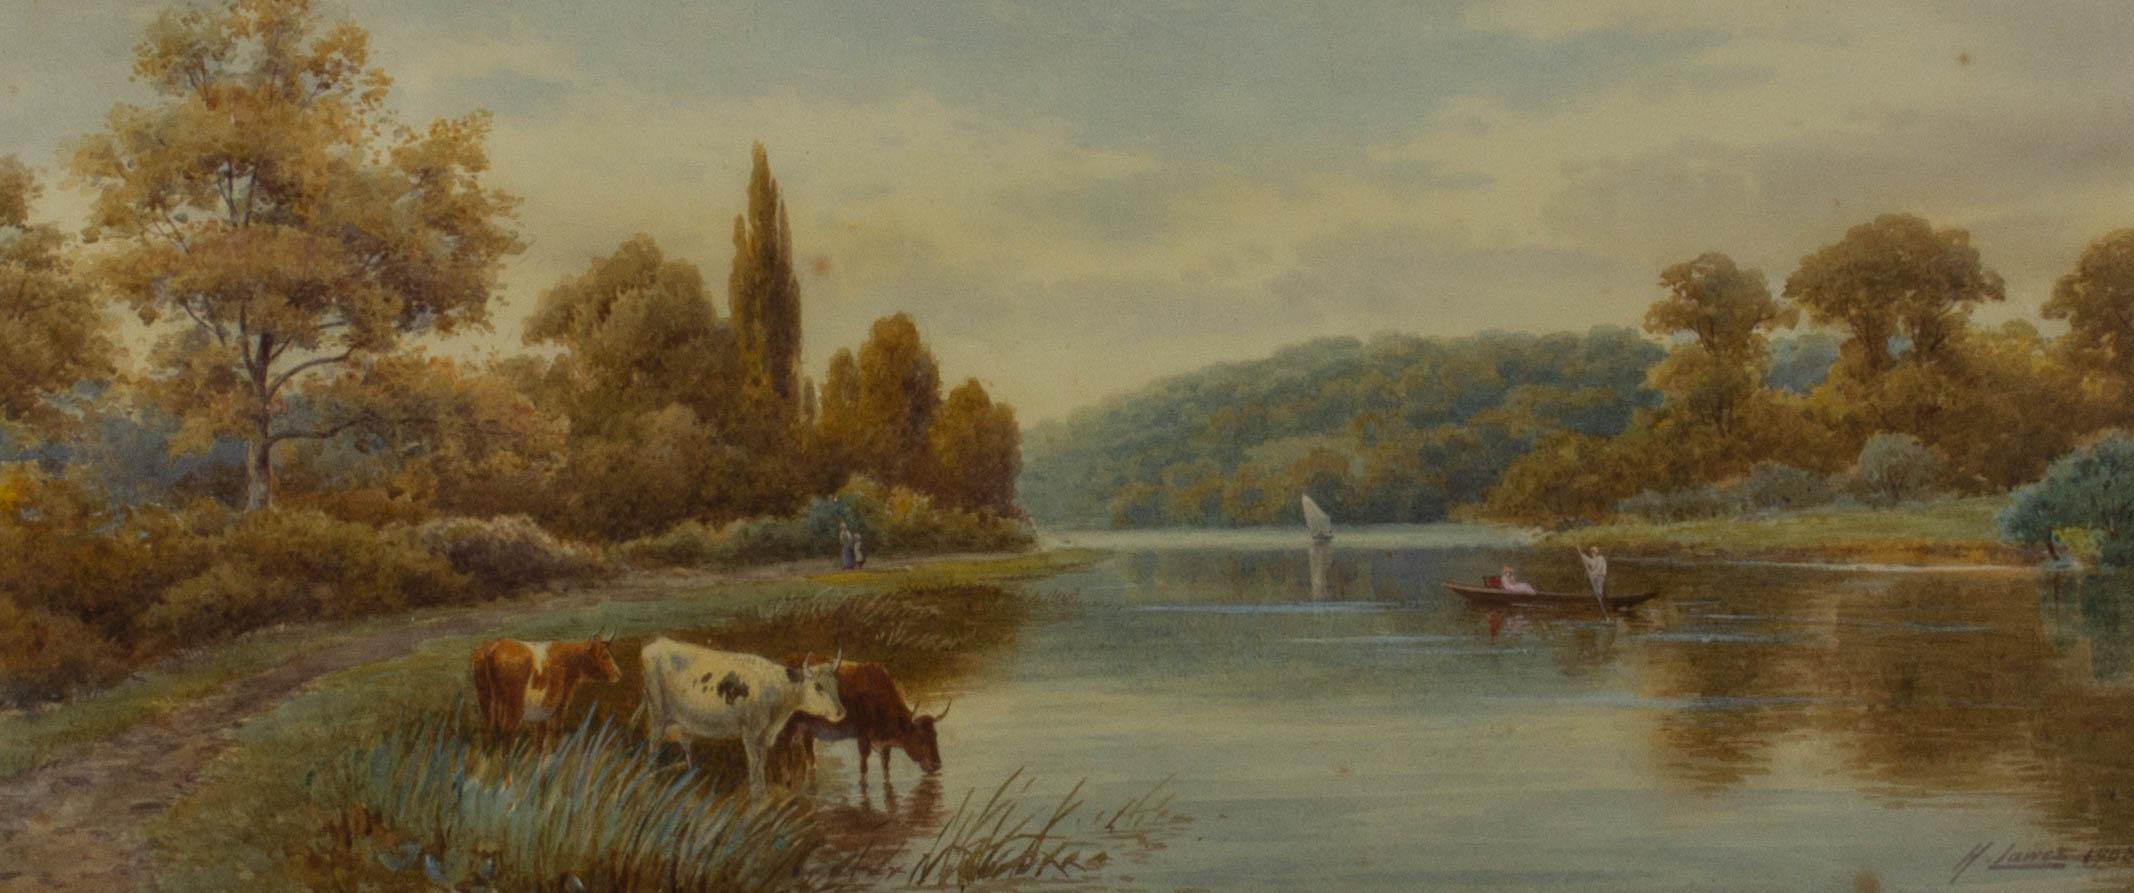 An English river scene with cows standing in the shallow water and figures punting on the water. Presented glazed in a gold card mount and a gold painted wooden frame with a bead course to the outer edge. Signed and dated to the lower-right edge. On